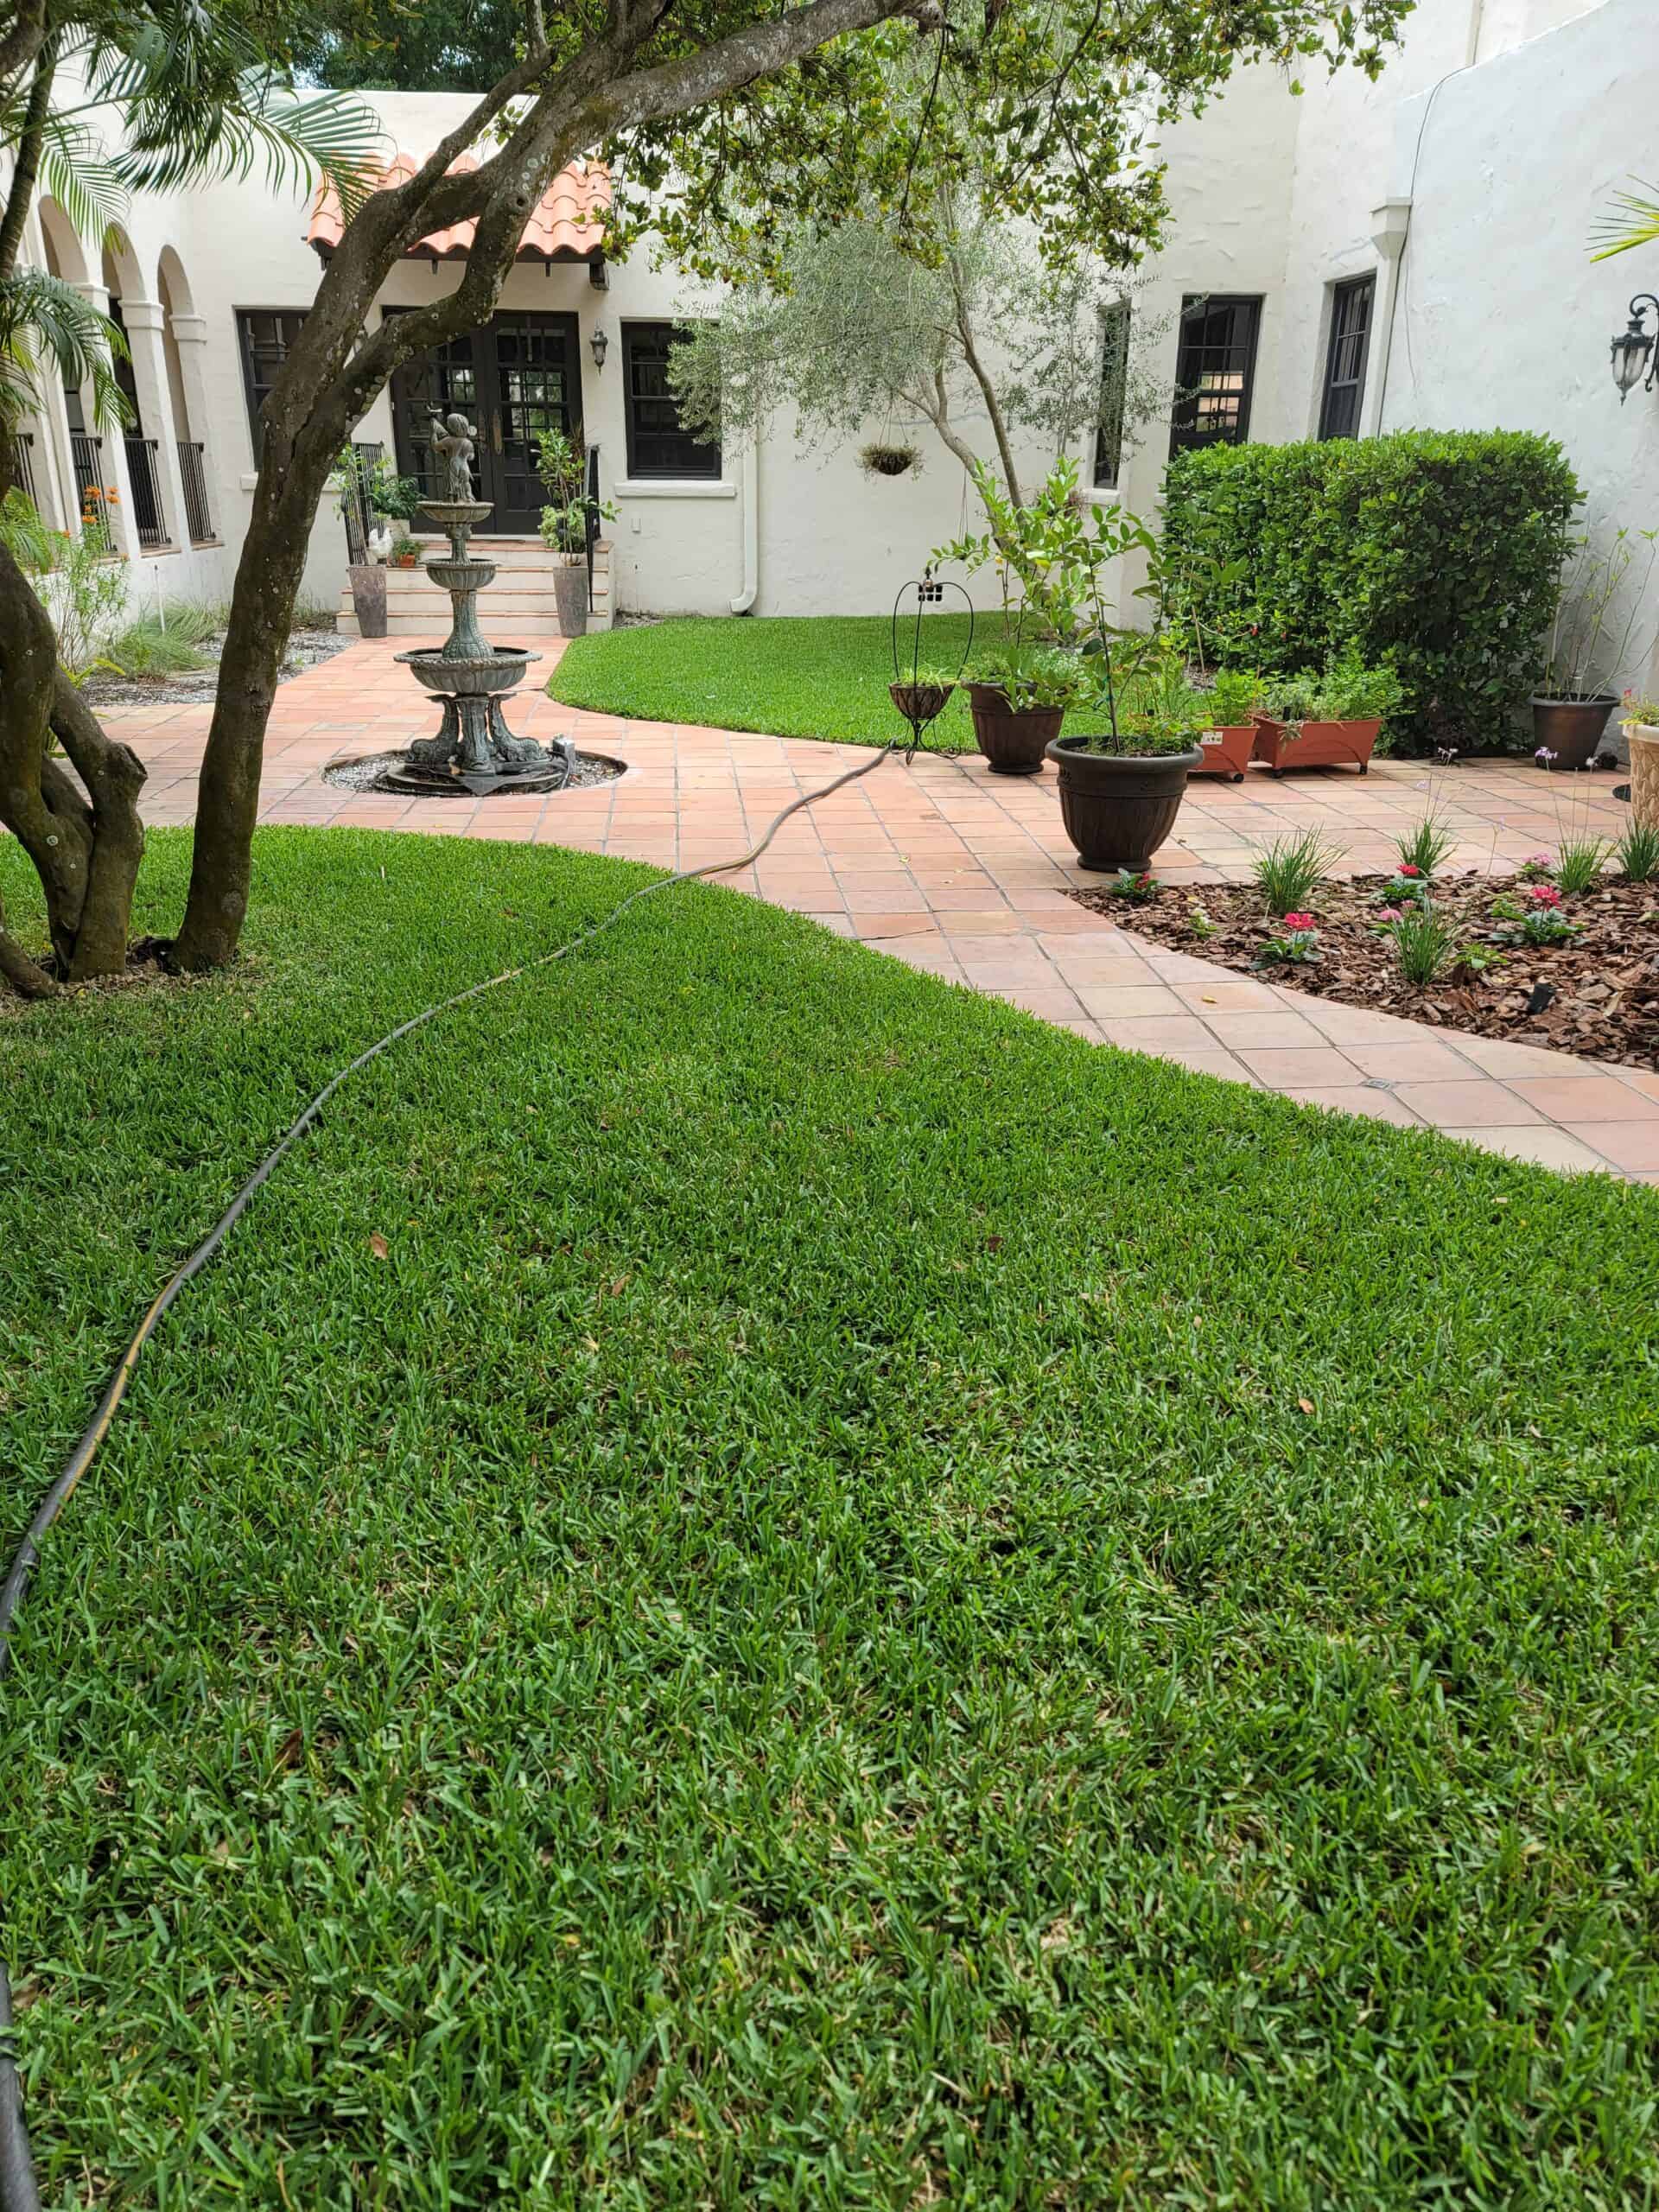 Lush landscape maintenance services in St. Pete Beach, Gulfport, and South Pasadena, FL!